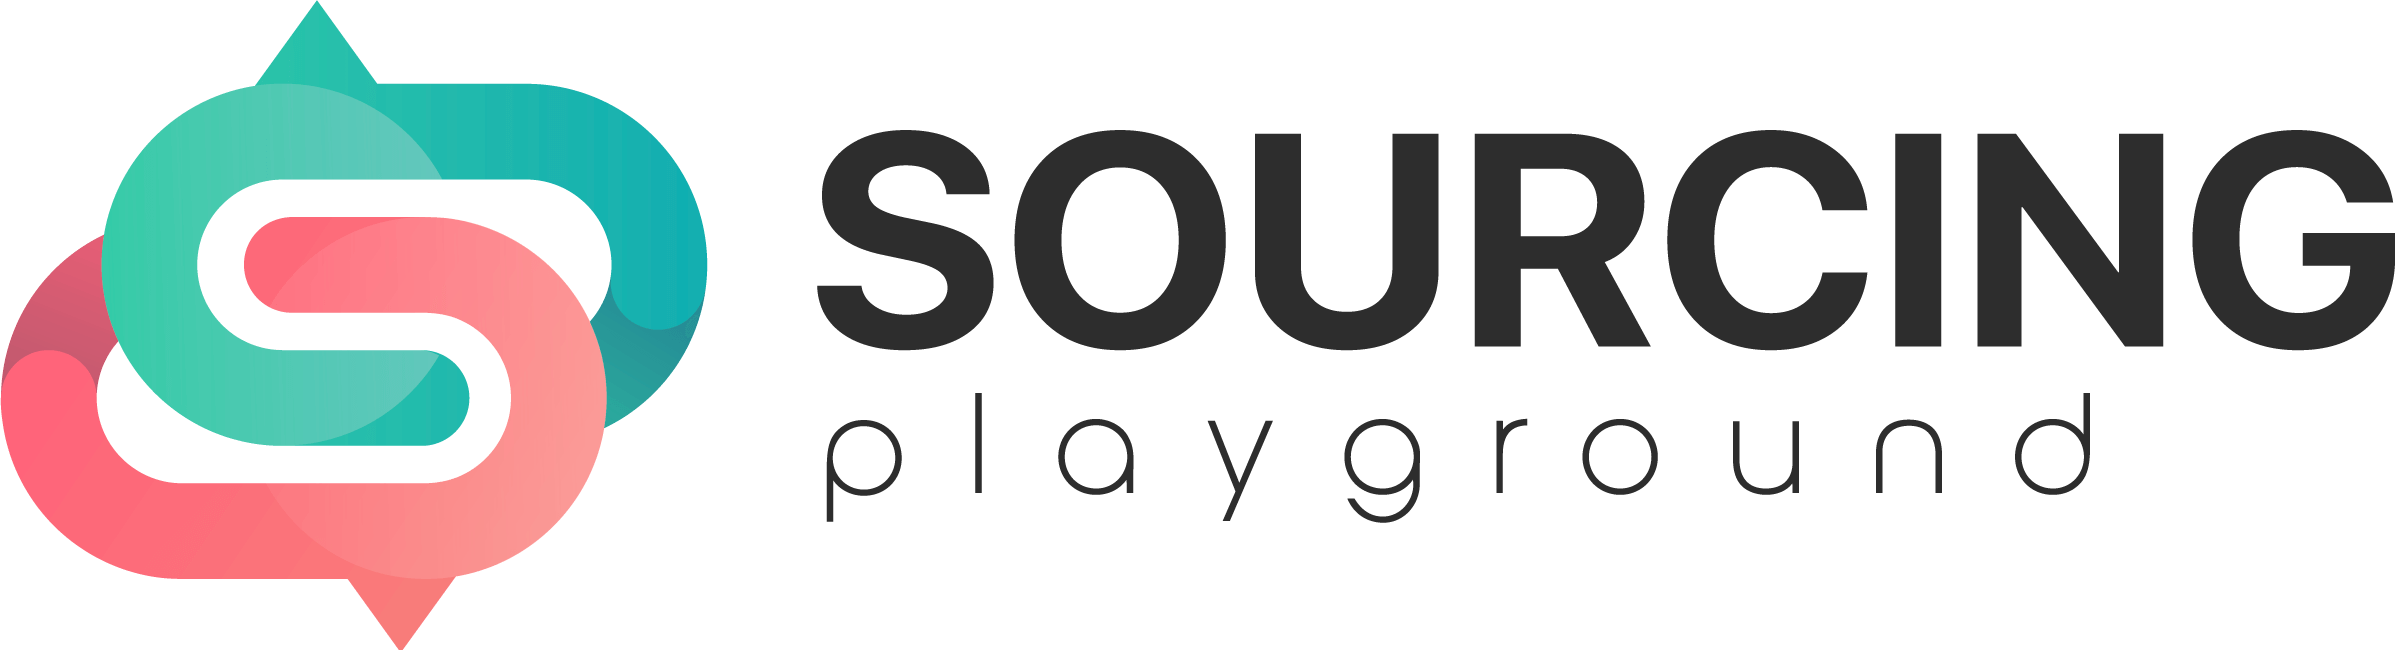 Sourcing Playground - Source for Finding Sustainable Clothing Manufacturers